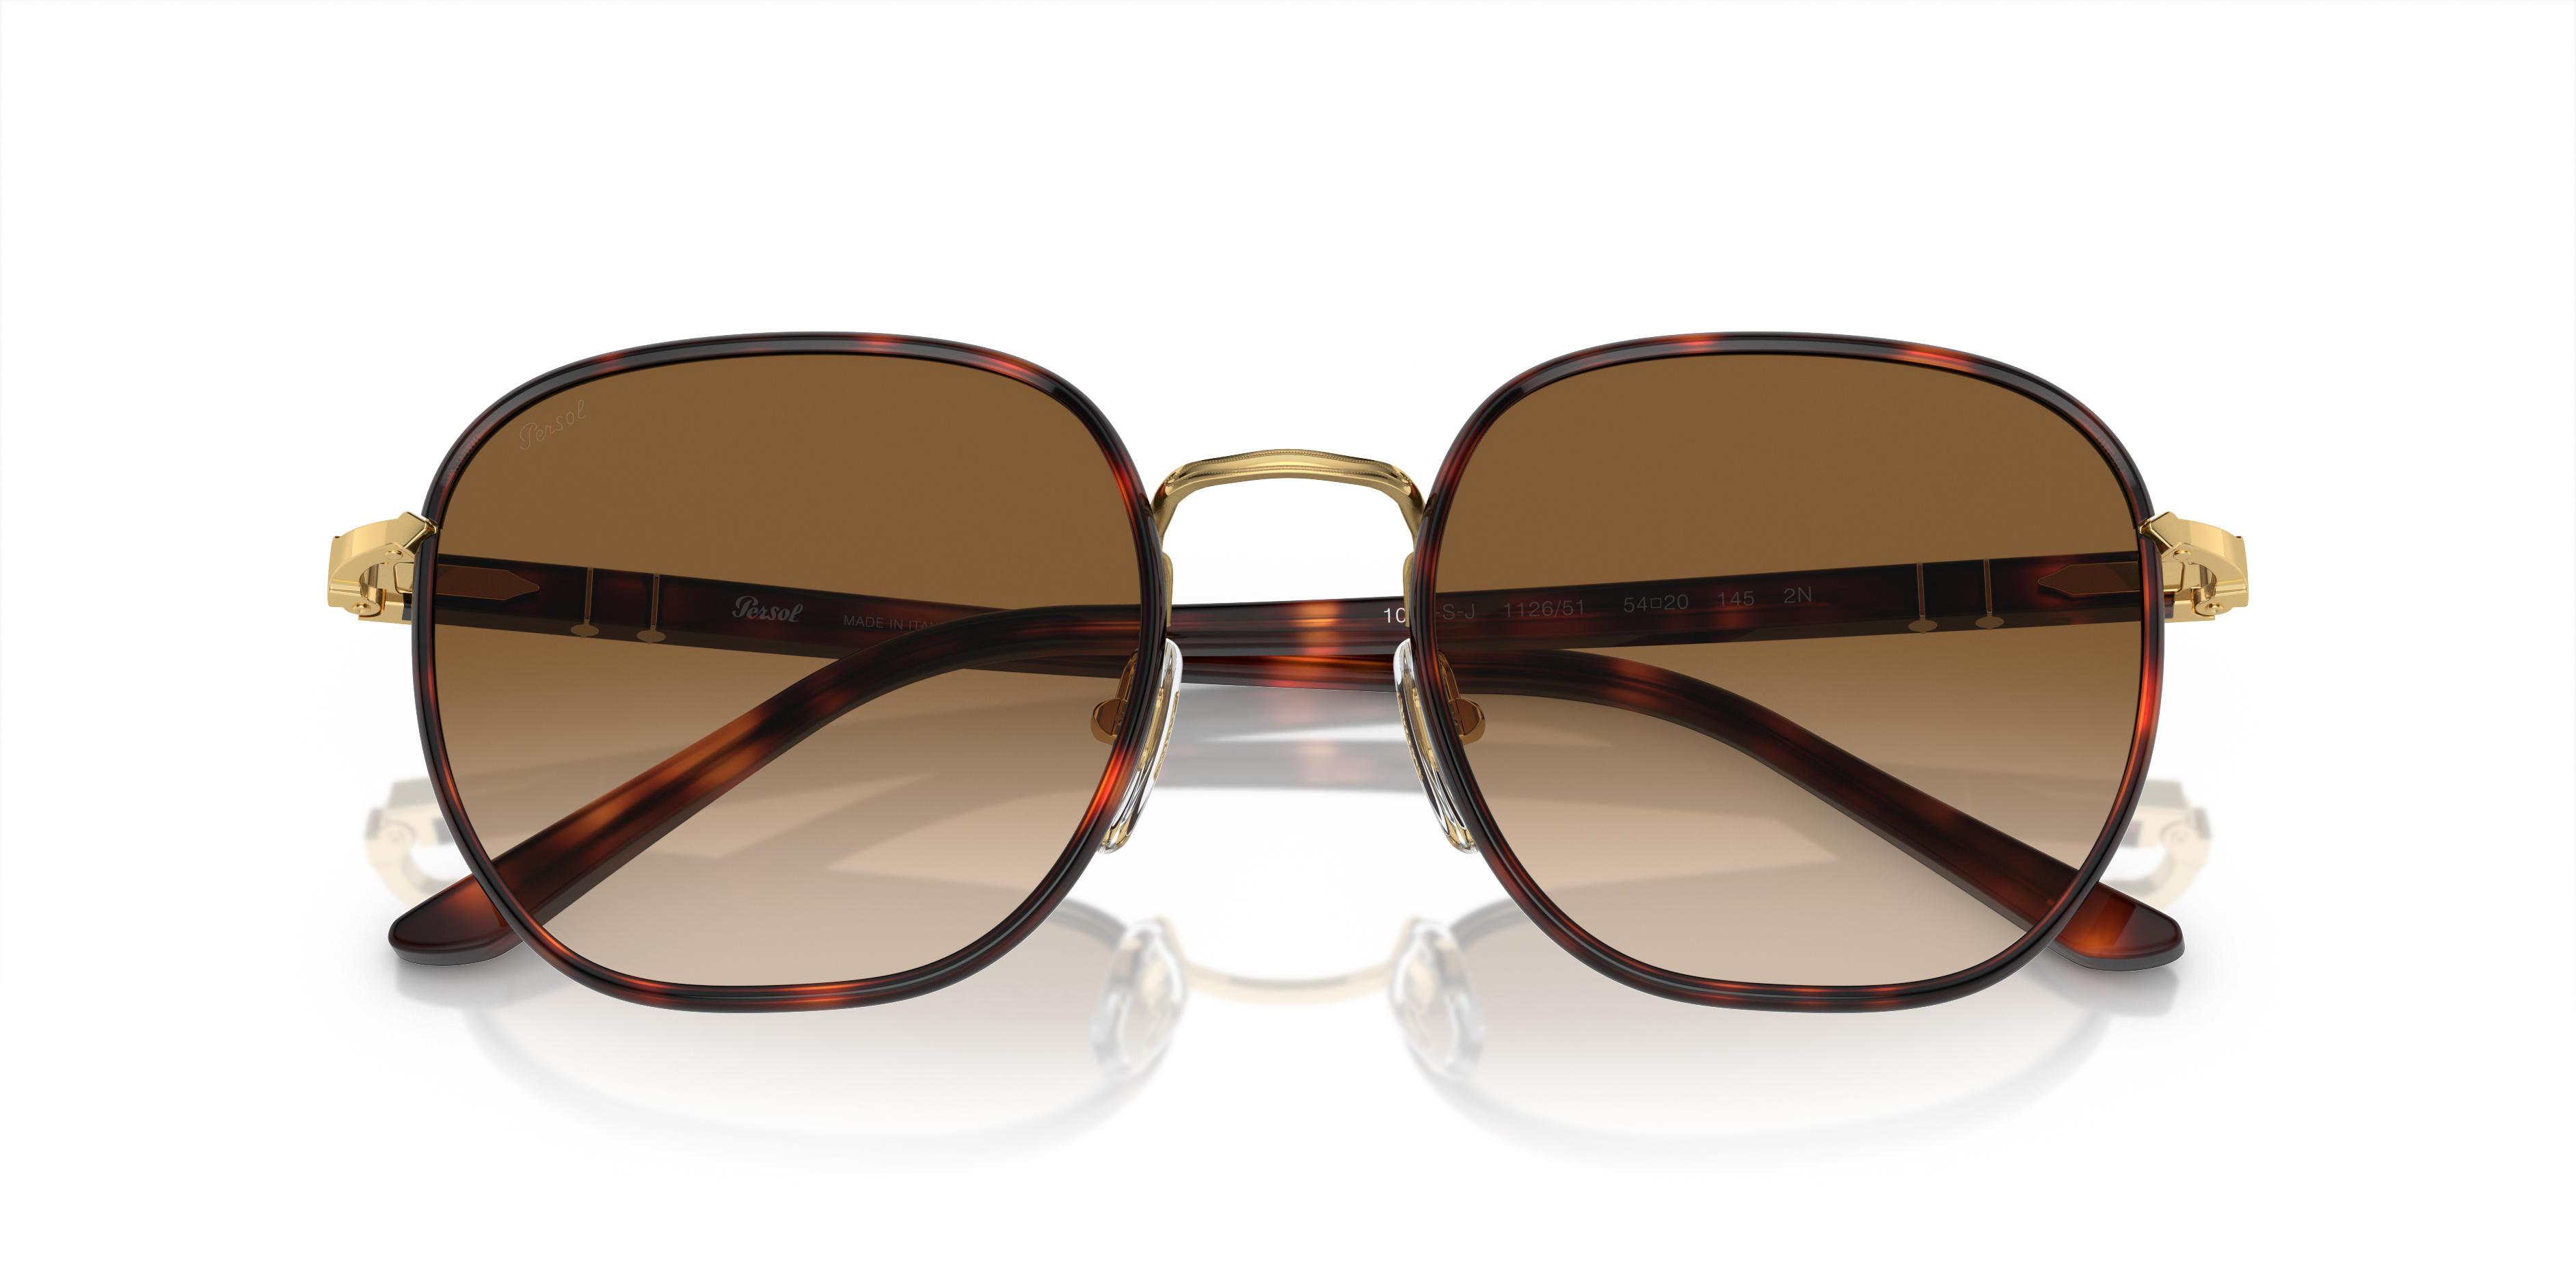 [products.image.folded] Persol 0PO1015SJ 112651